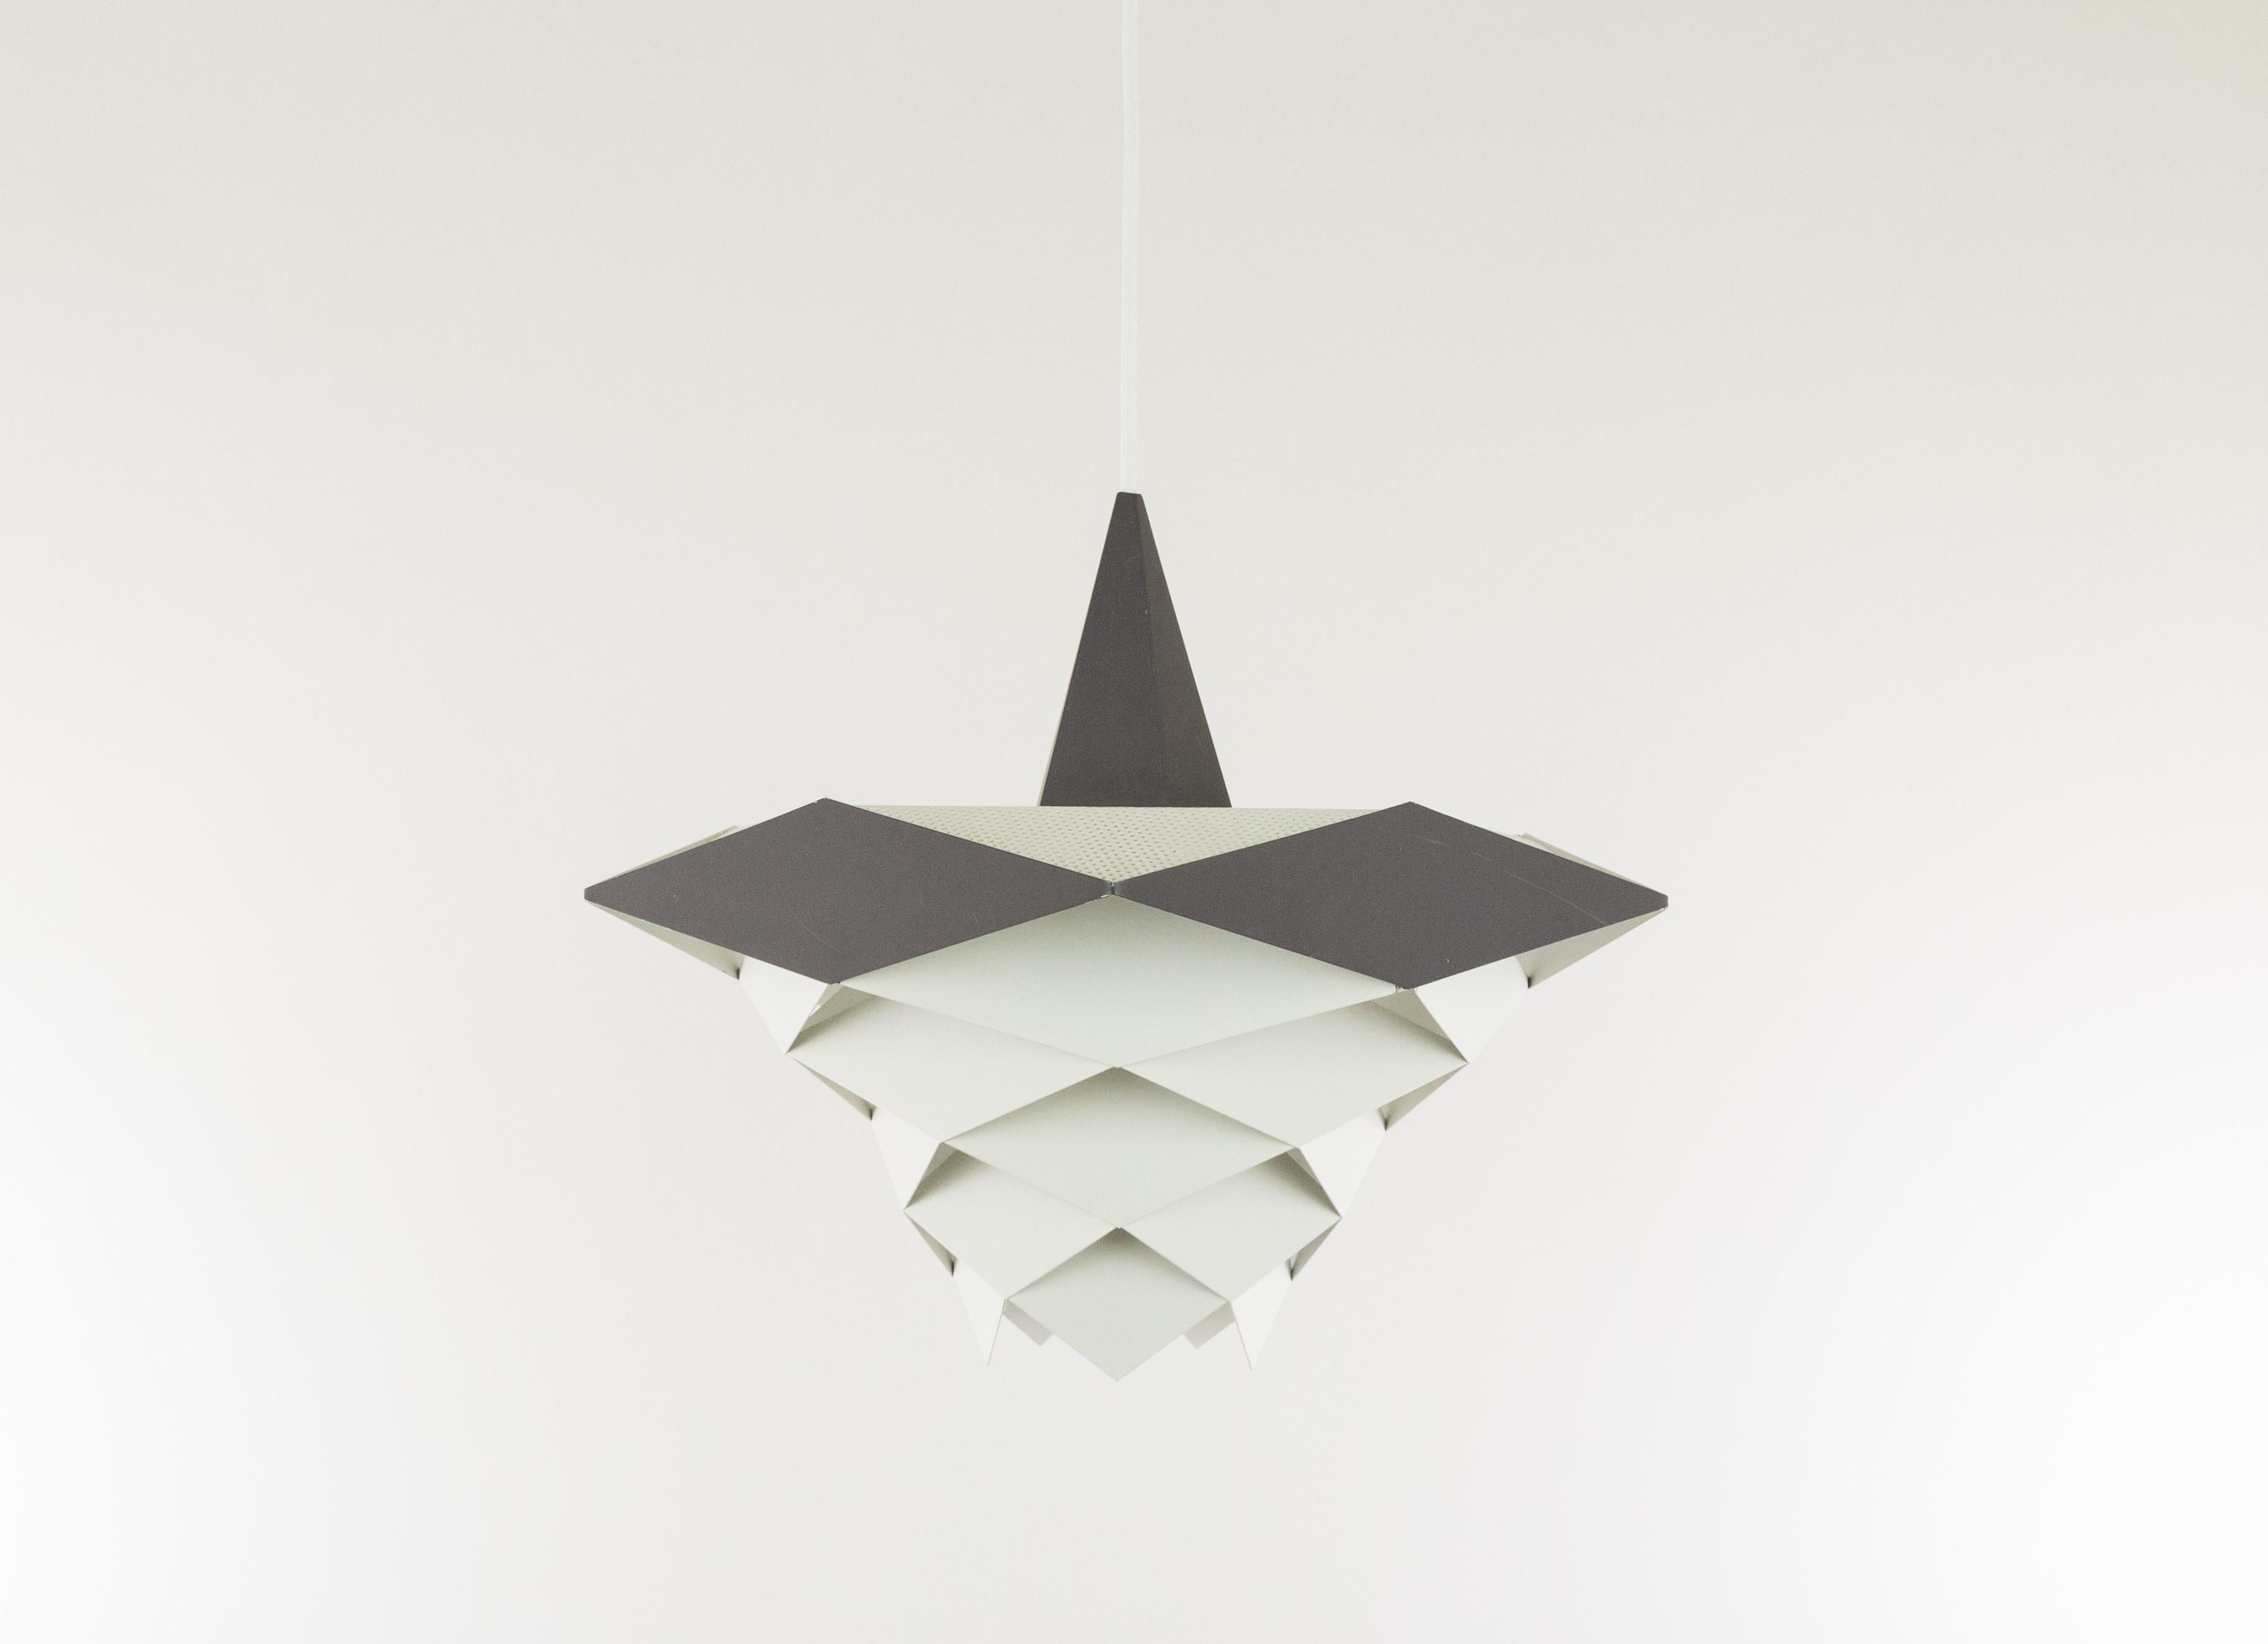 Rare medium sized pentagonal pendant designed by Preben Dahl in the early 1960s and produced by Danish lighting manufacturer Hans Følsgaard Belysning.

The lamp is part of the 'Symfoni' lighting series, consisting of ceiling lights and pendants